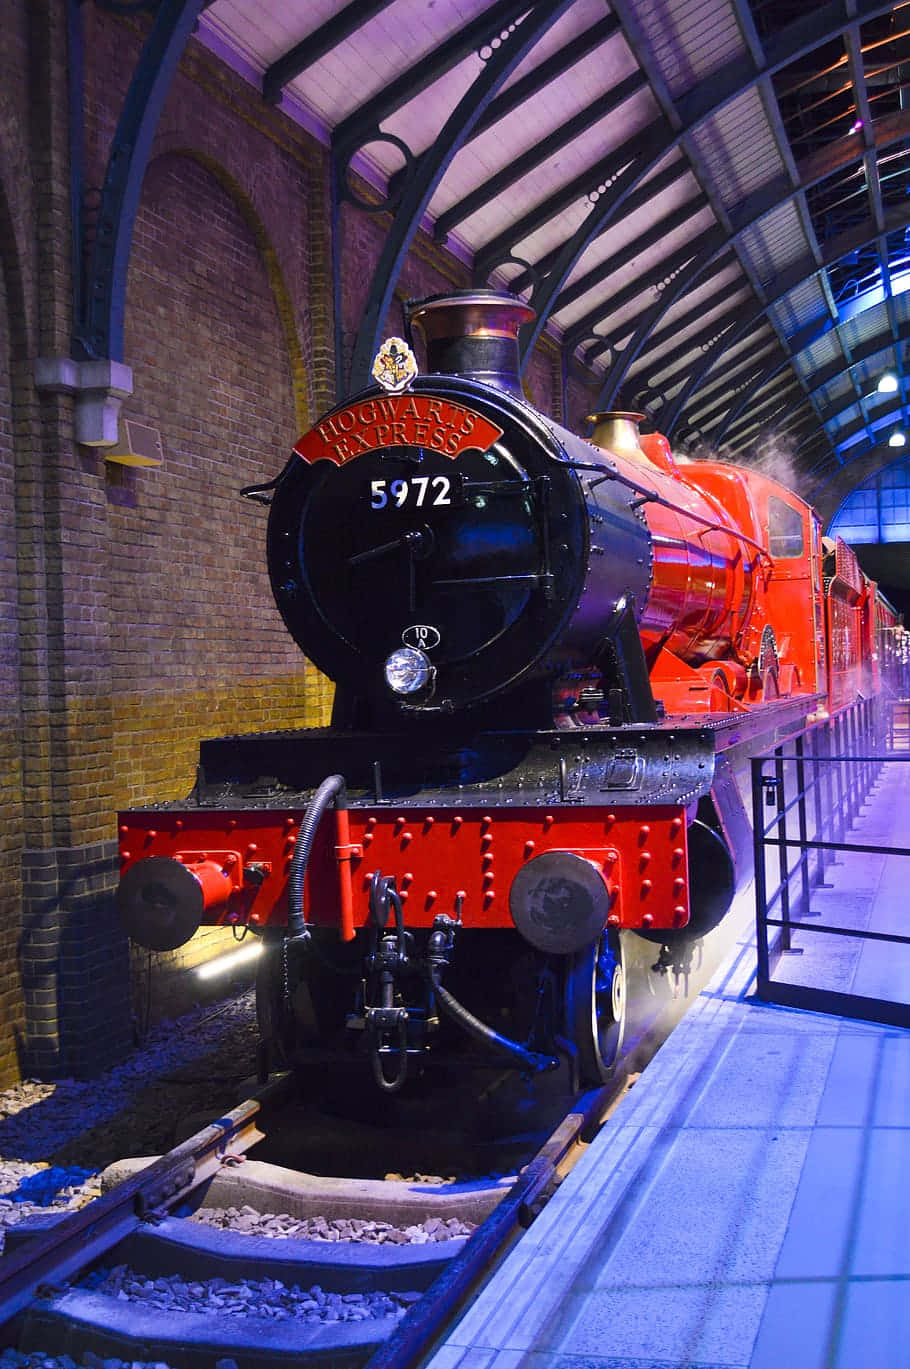 The iconic Hogwarts Express steams through the countryside on its way to the magical school. Wallpaper